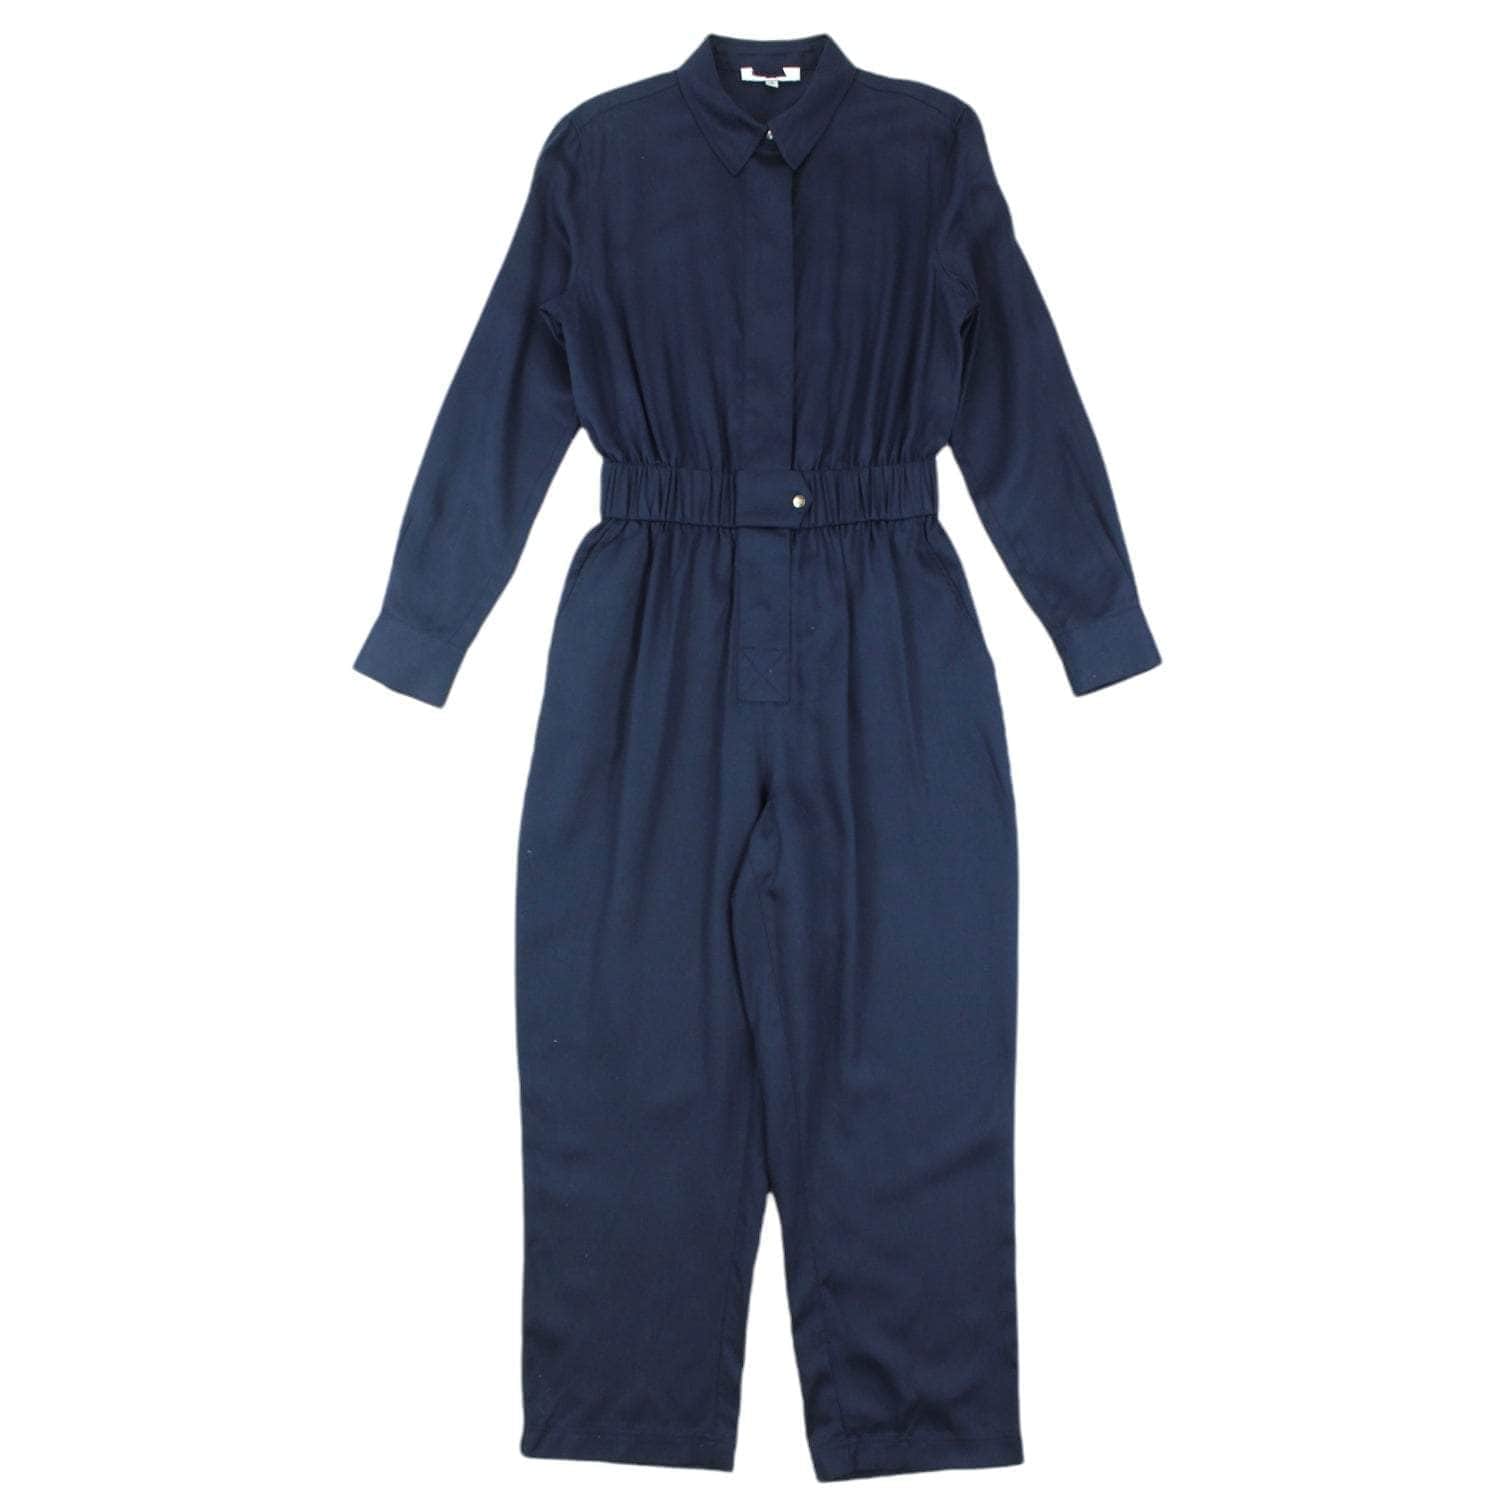 NRBY Navy Blue Jumpsuit